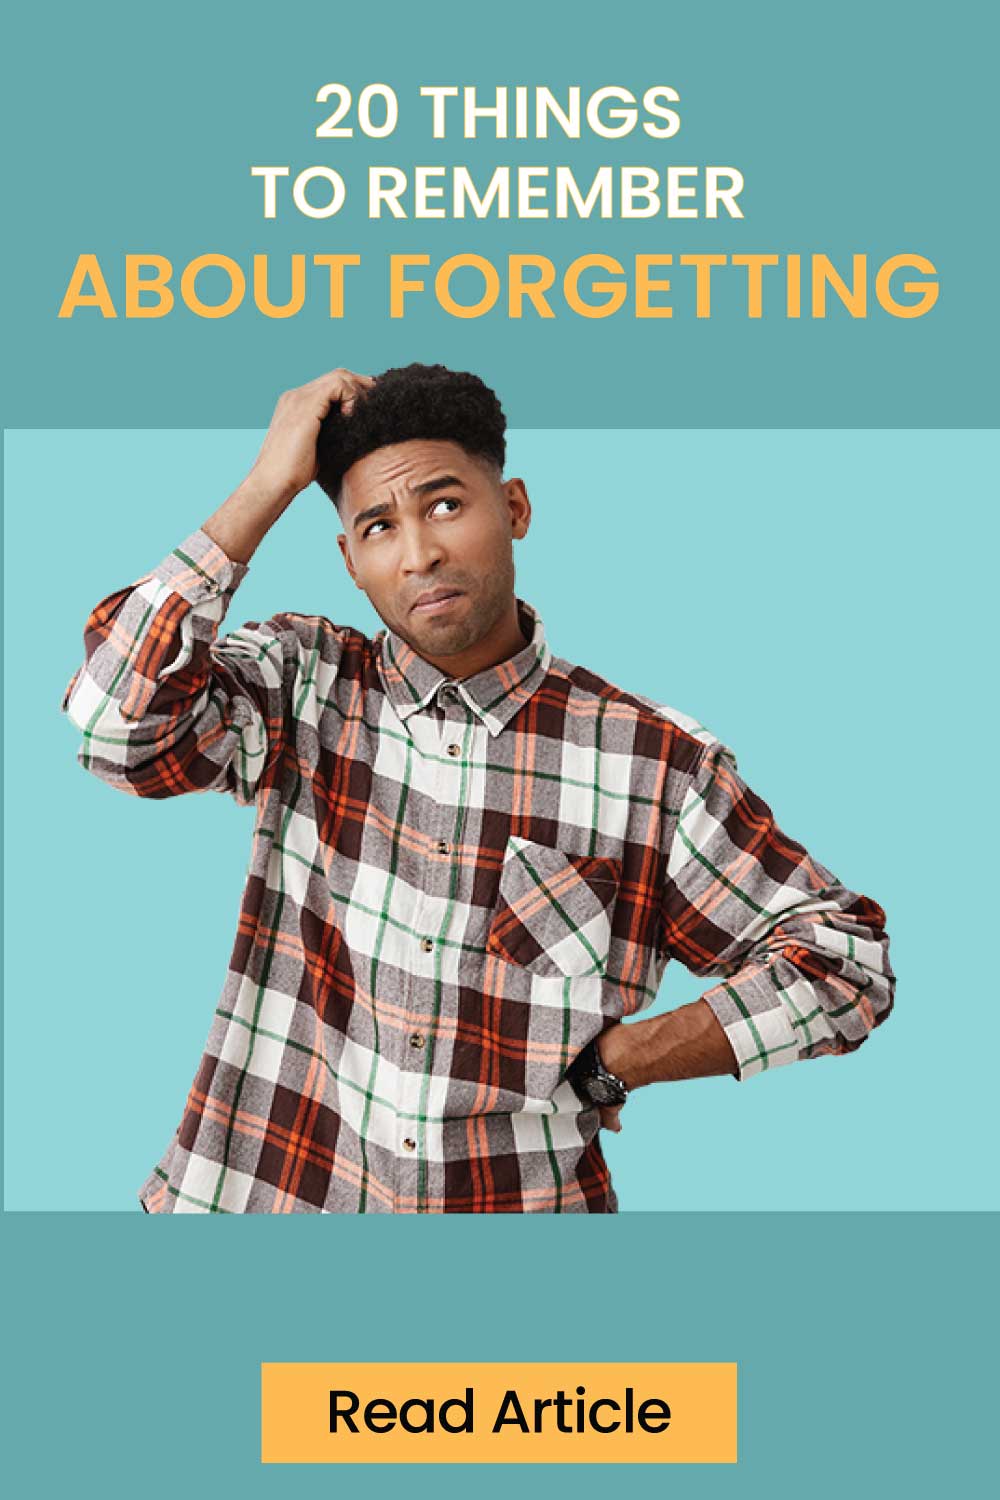 20 Things To Remember About Forgetting